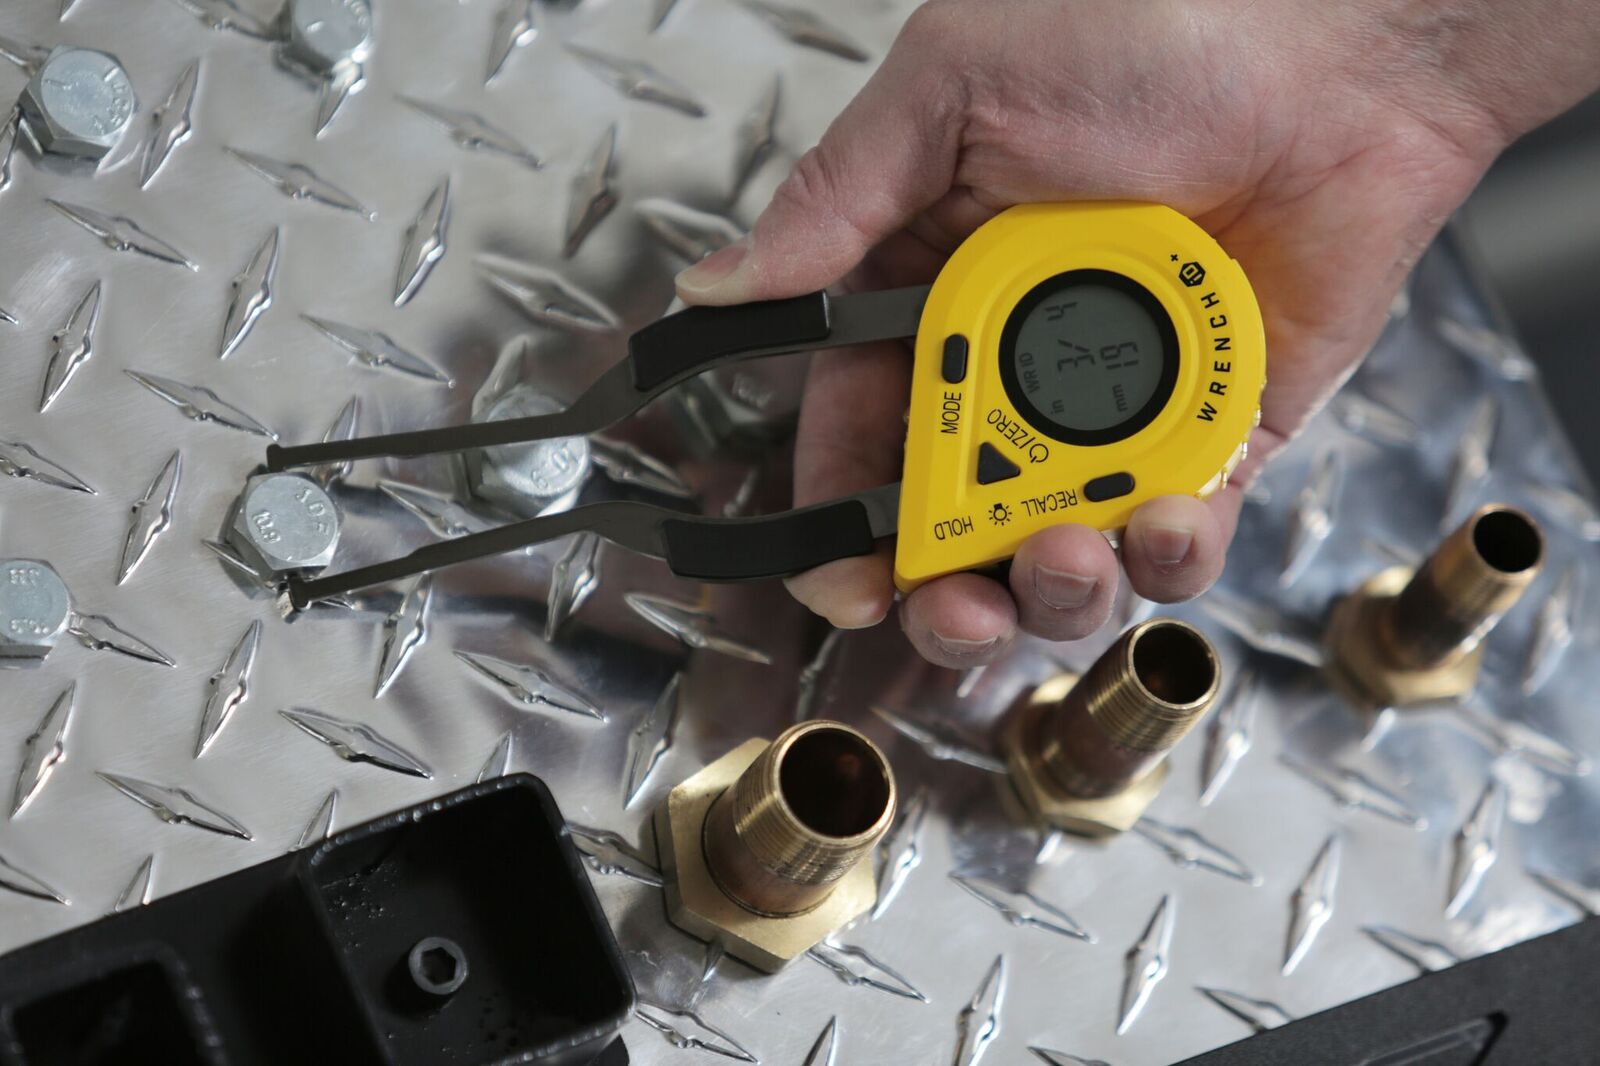 The WrenchID being used to measure the size of a bolt.